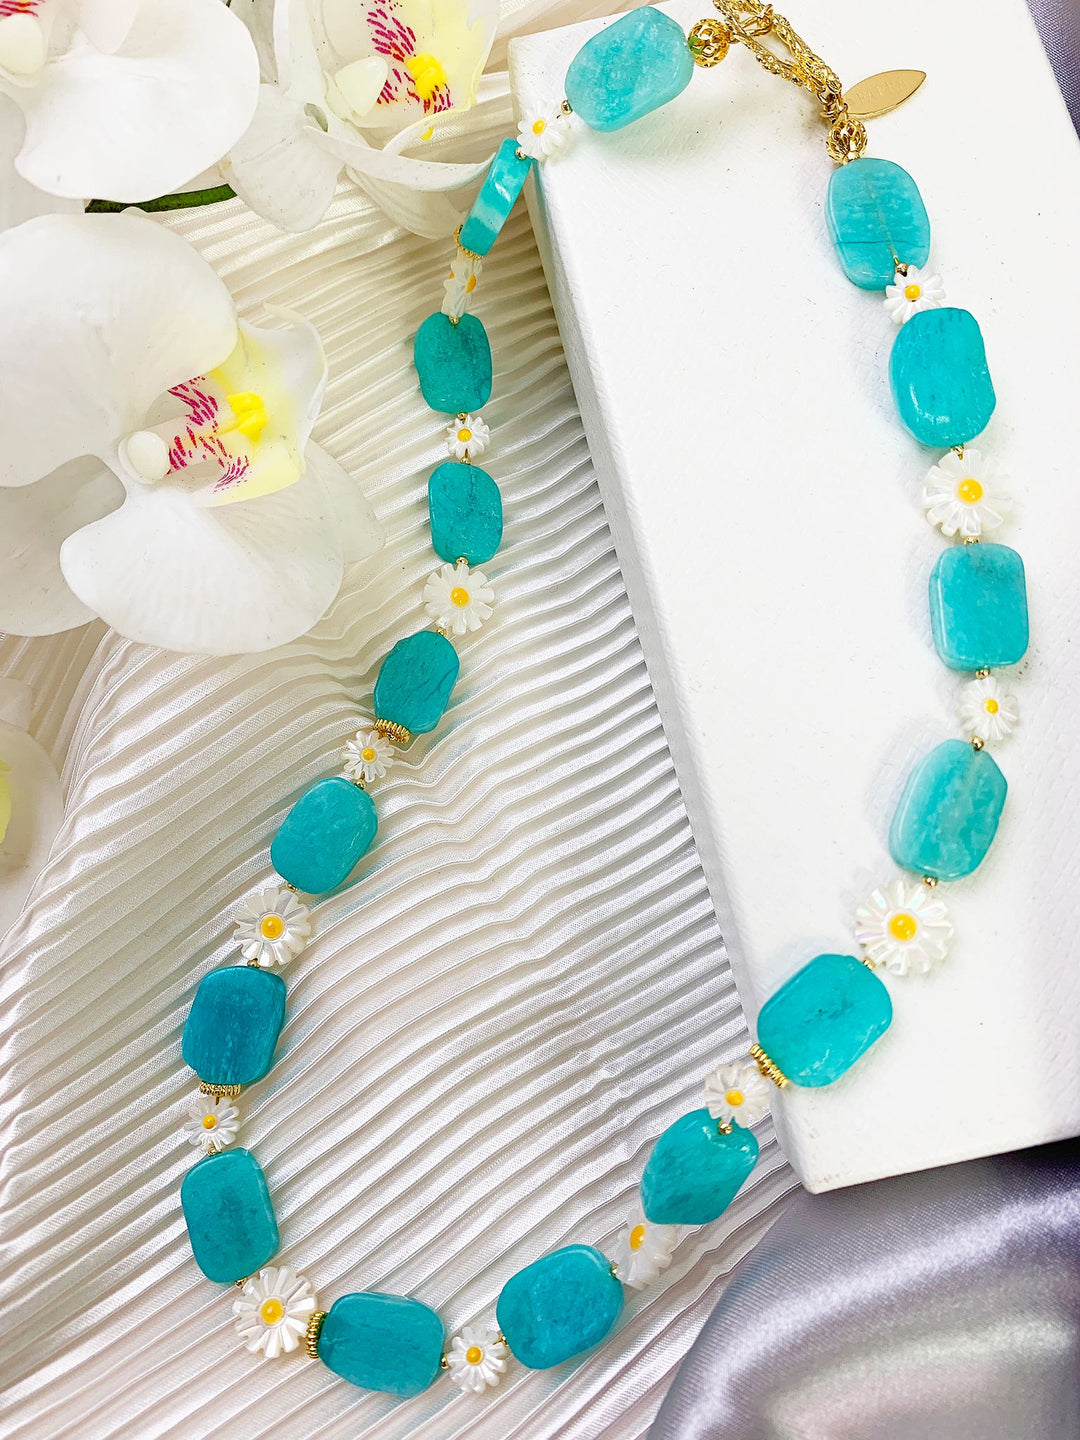 Amazonite With Floral Charms Necklace GN025 - FARRA